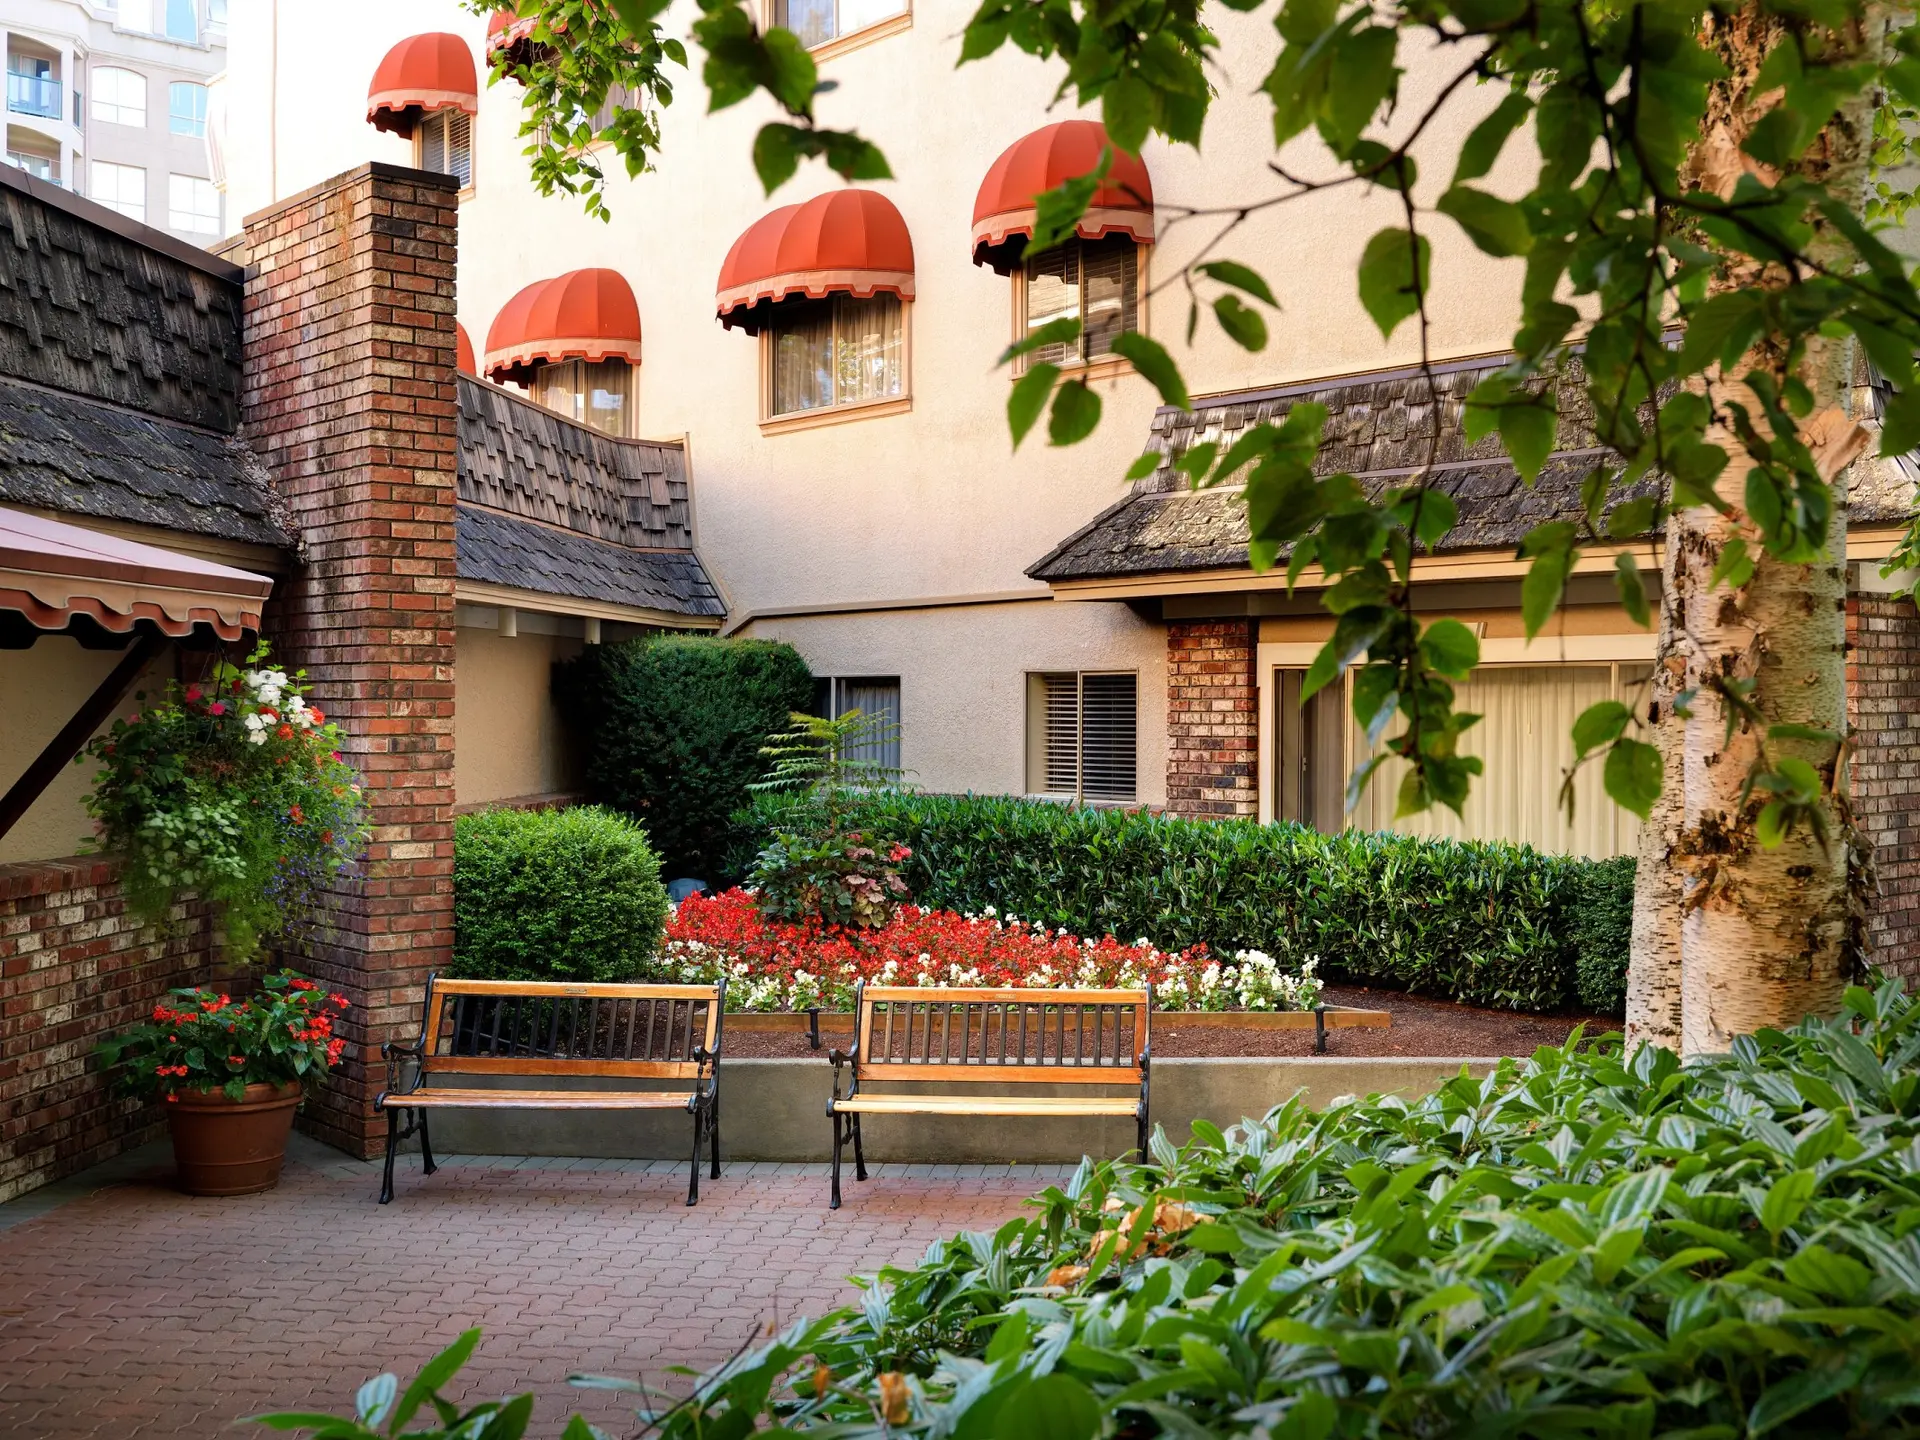 The back entrance of the Royal Scot Hotel in Victoria, BC showcasing a quaint garden and seating area